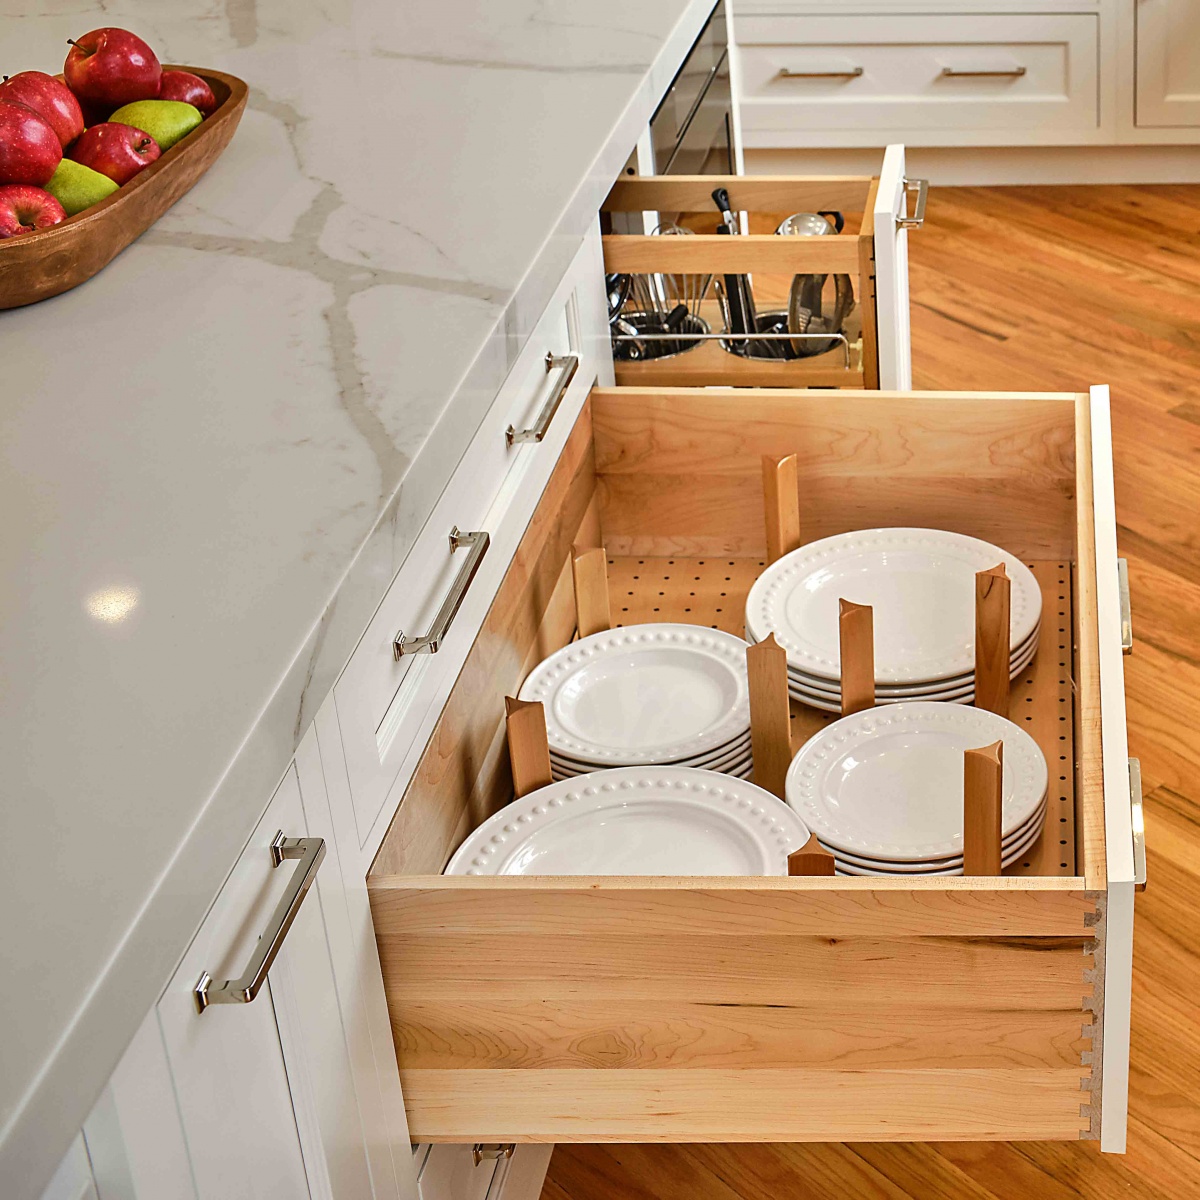 Simple Tips for Kitchen Organization | The Kitchen Company